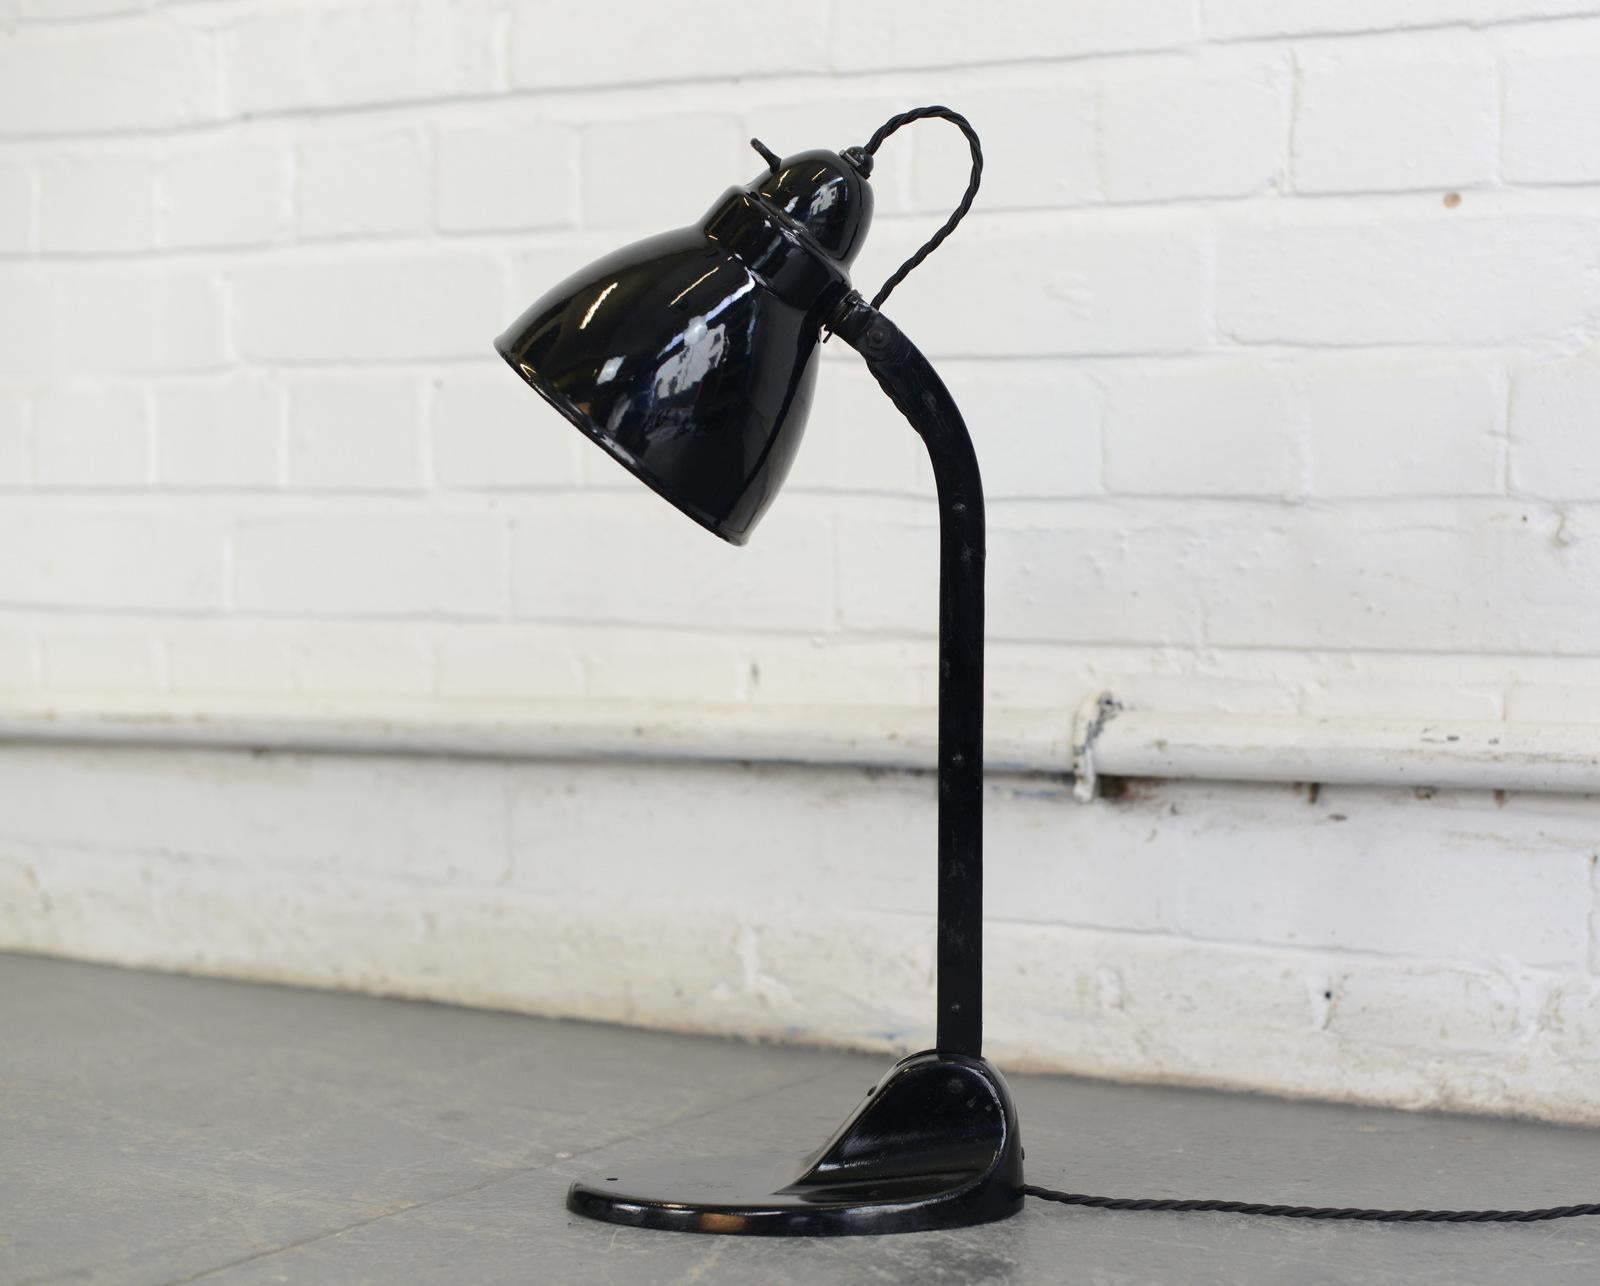 Desk lamp by Viktoria, circa 1930s.

- Vitreous enamel shade
- Adjustable arm and shade
- Cast iron base
- Takes E27 fitting bulbs
- Original bulb holder and switch
- Embossed Viktoria Lampe on the base
- German, 1930s
- Measures: 46cm tall